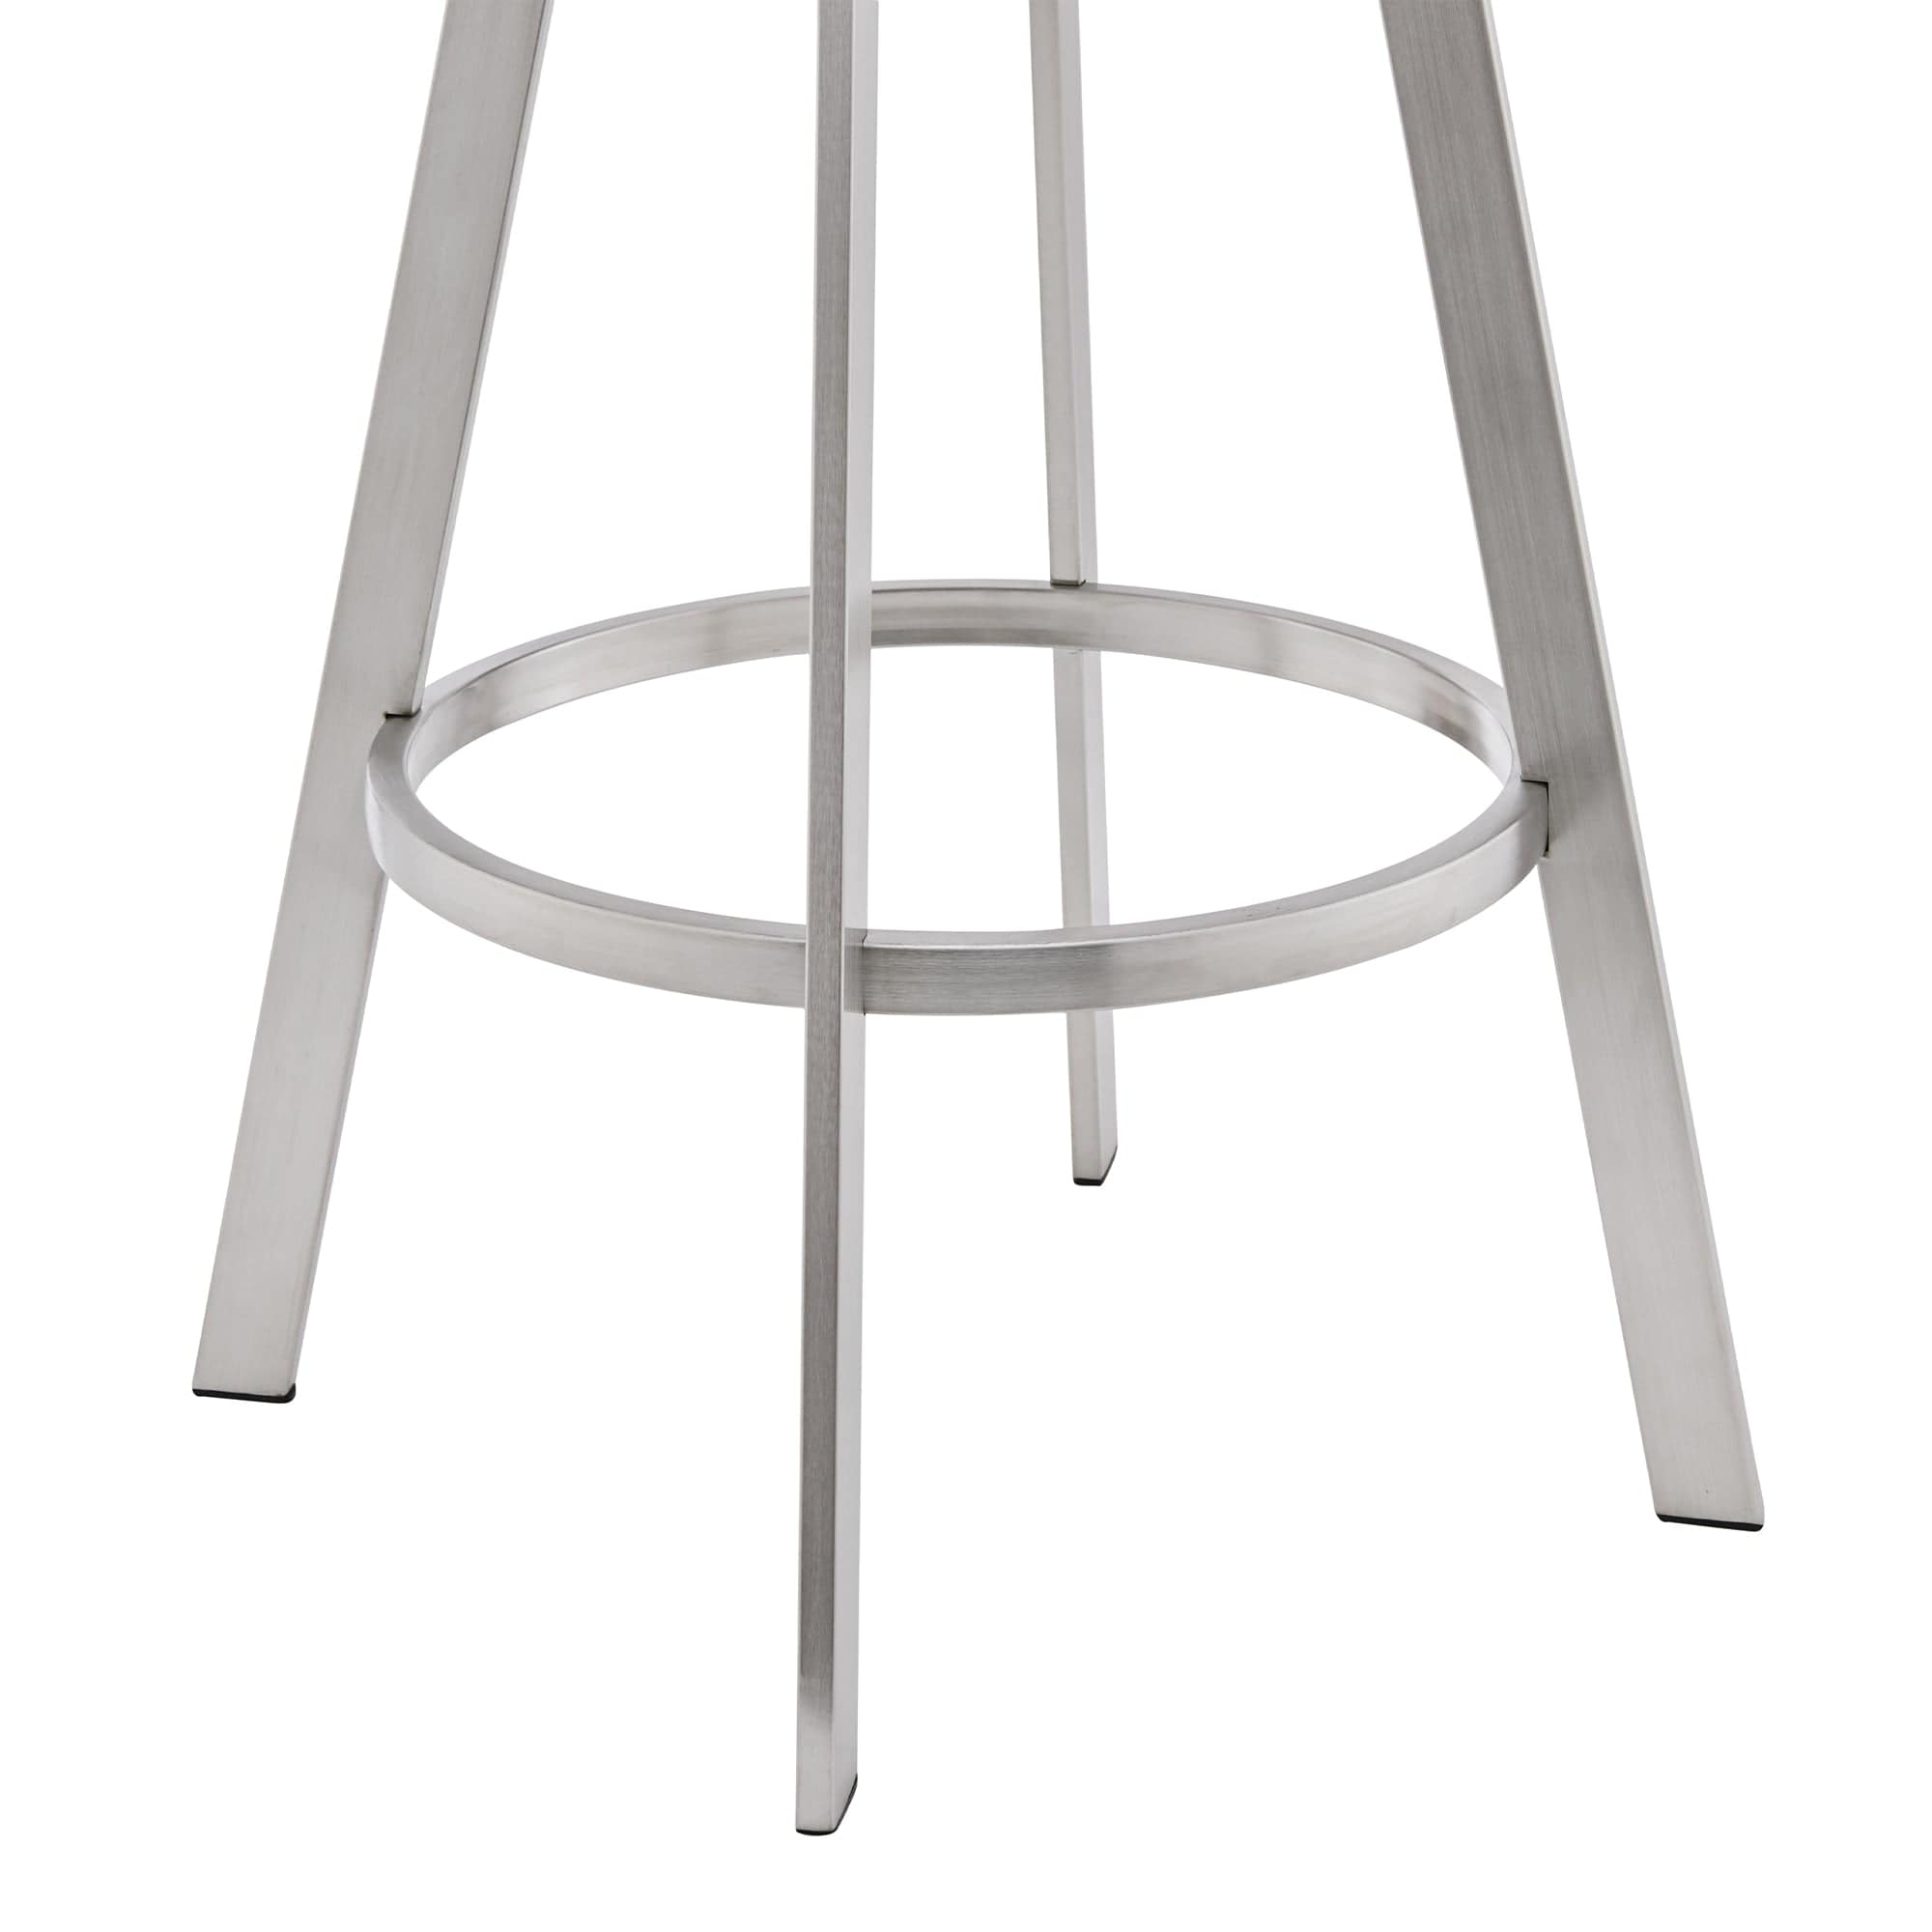 Armen Living Barstool Armen Living - Chelsea 30" Bar Height Swivel Bar Stool in Silver finish and White Faux Leather | LCCSBASLWH30